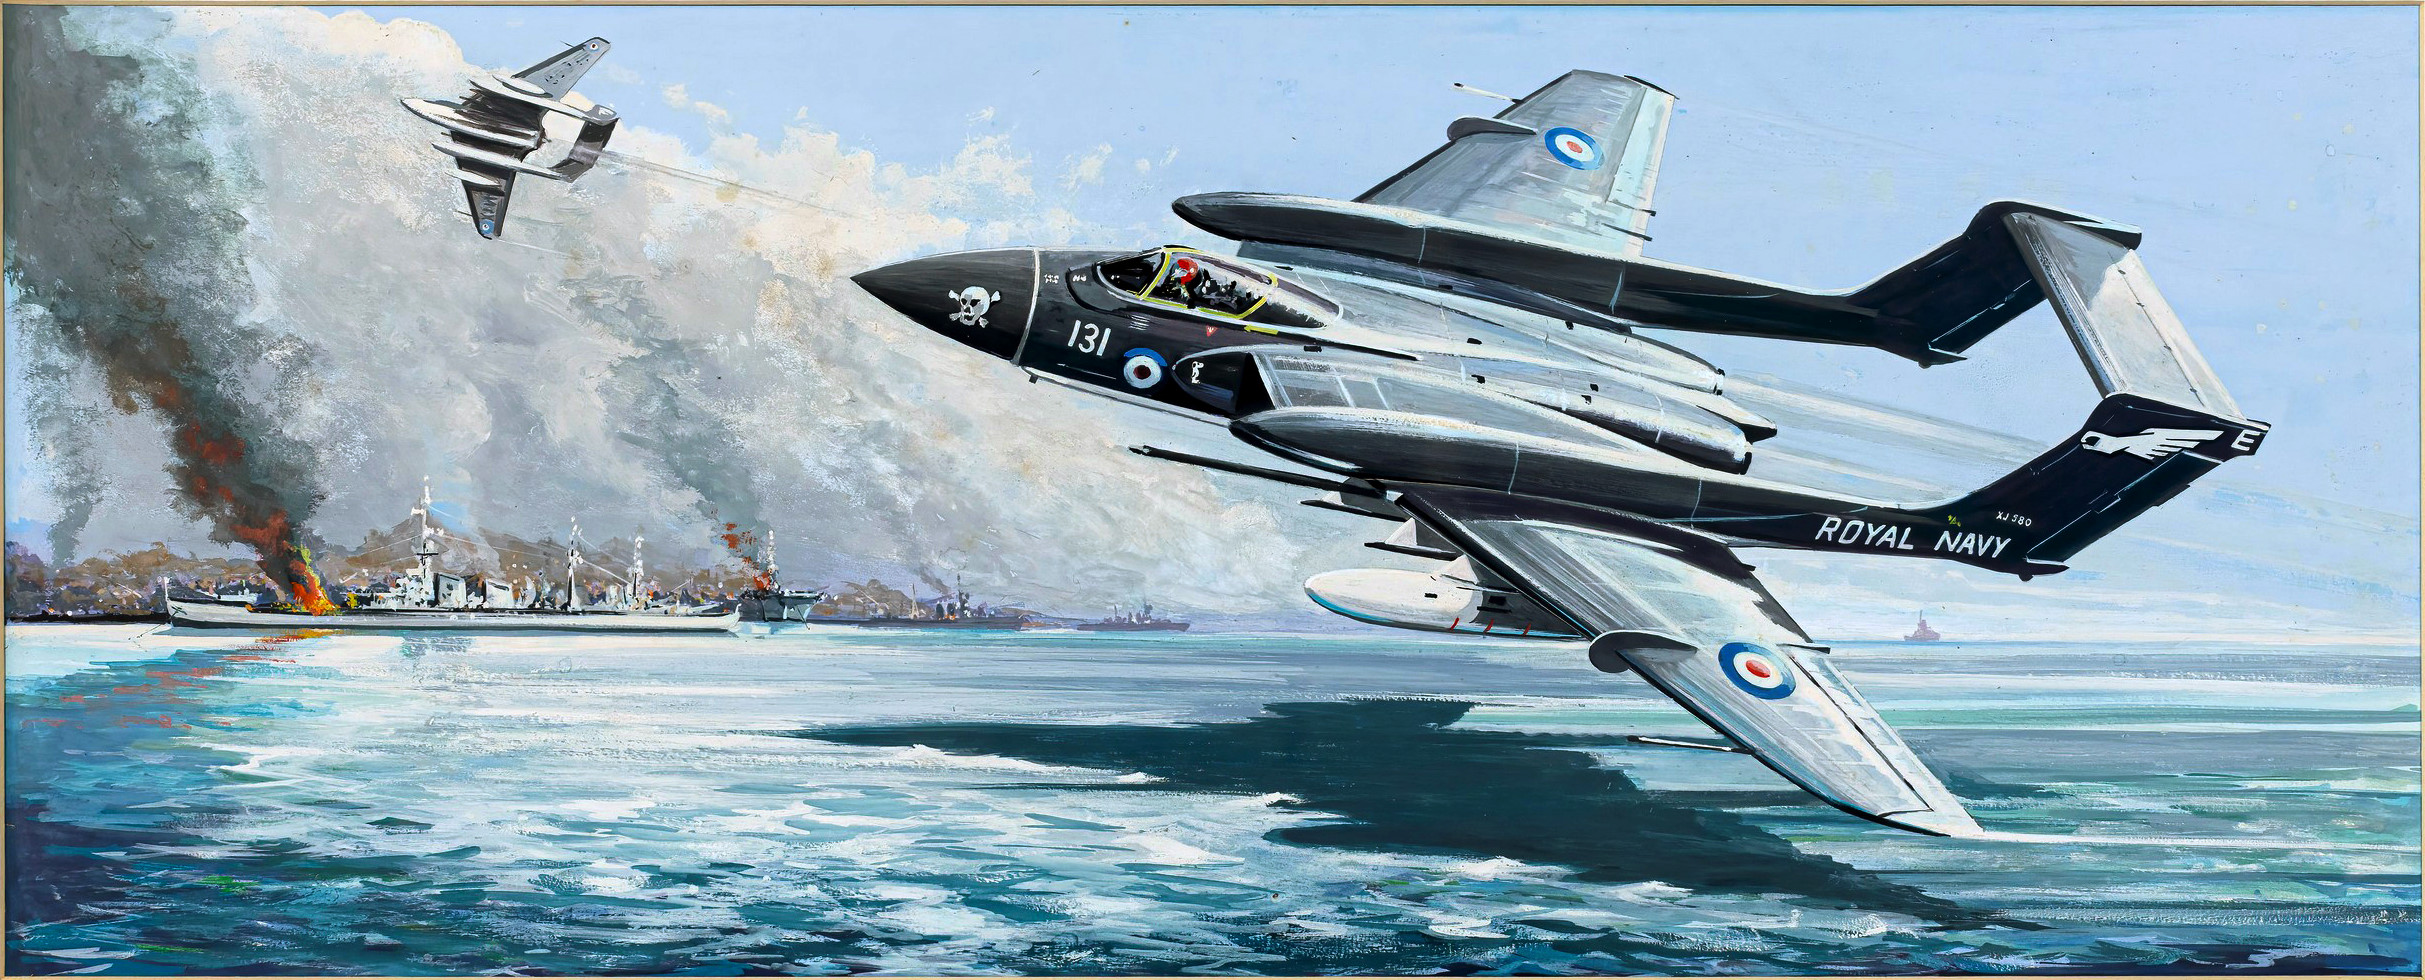 Box artwork for the FROG Hawker Siddeley Sea Vixen FAW.2 strike fighter model kit, c.1976. gouache, unsigned. 8 ¾ x 22in. (22.25 x 56cm)